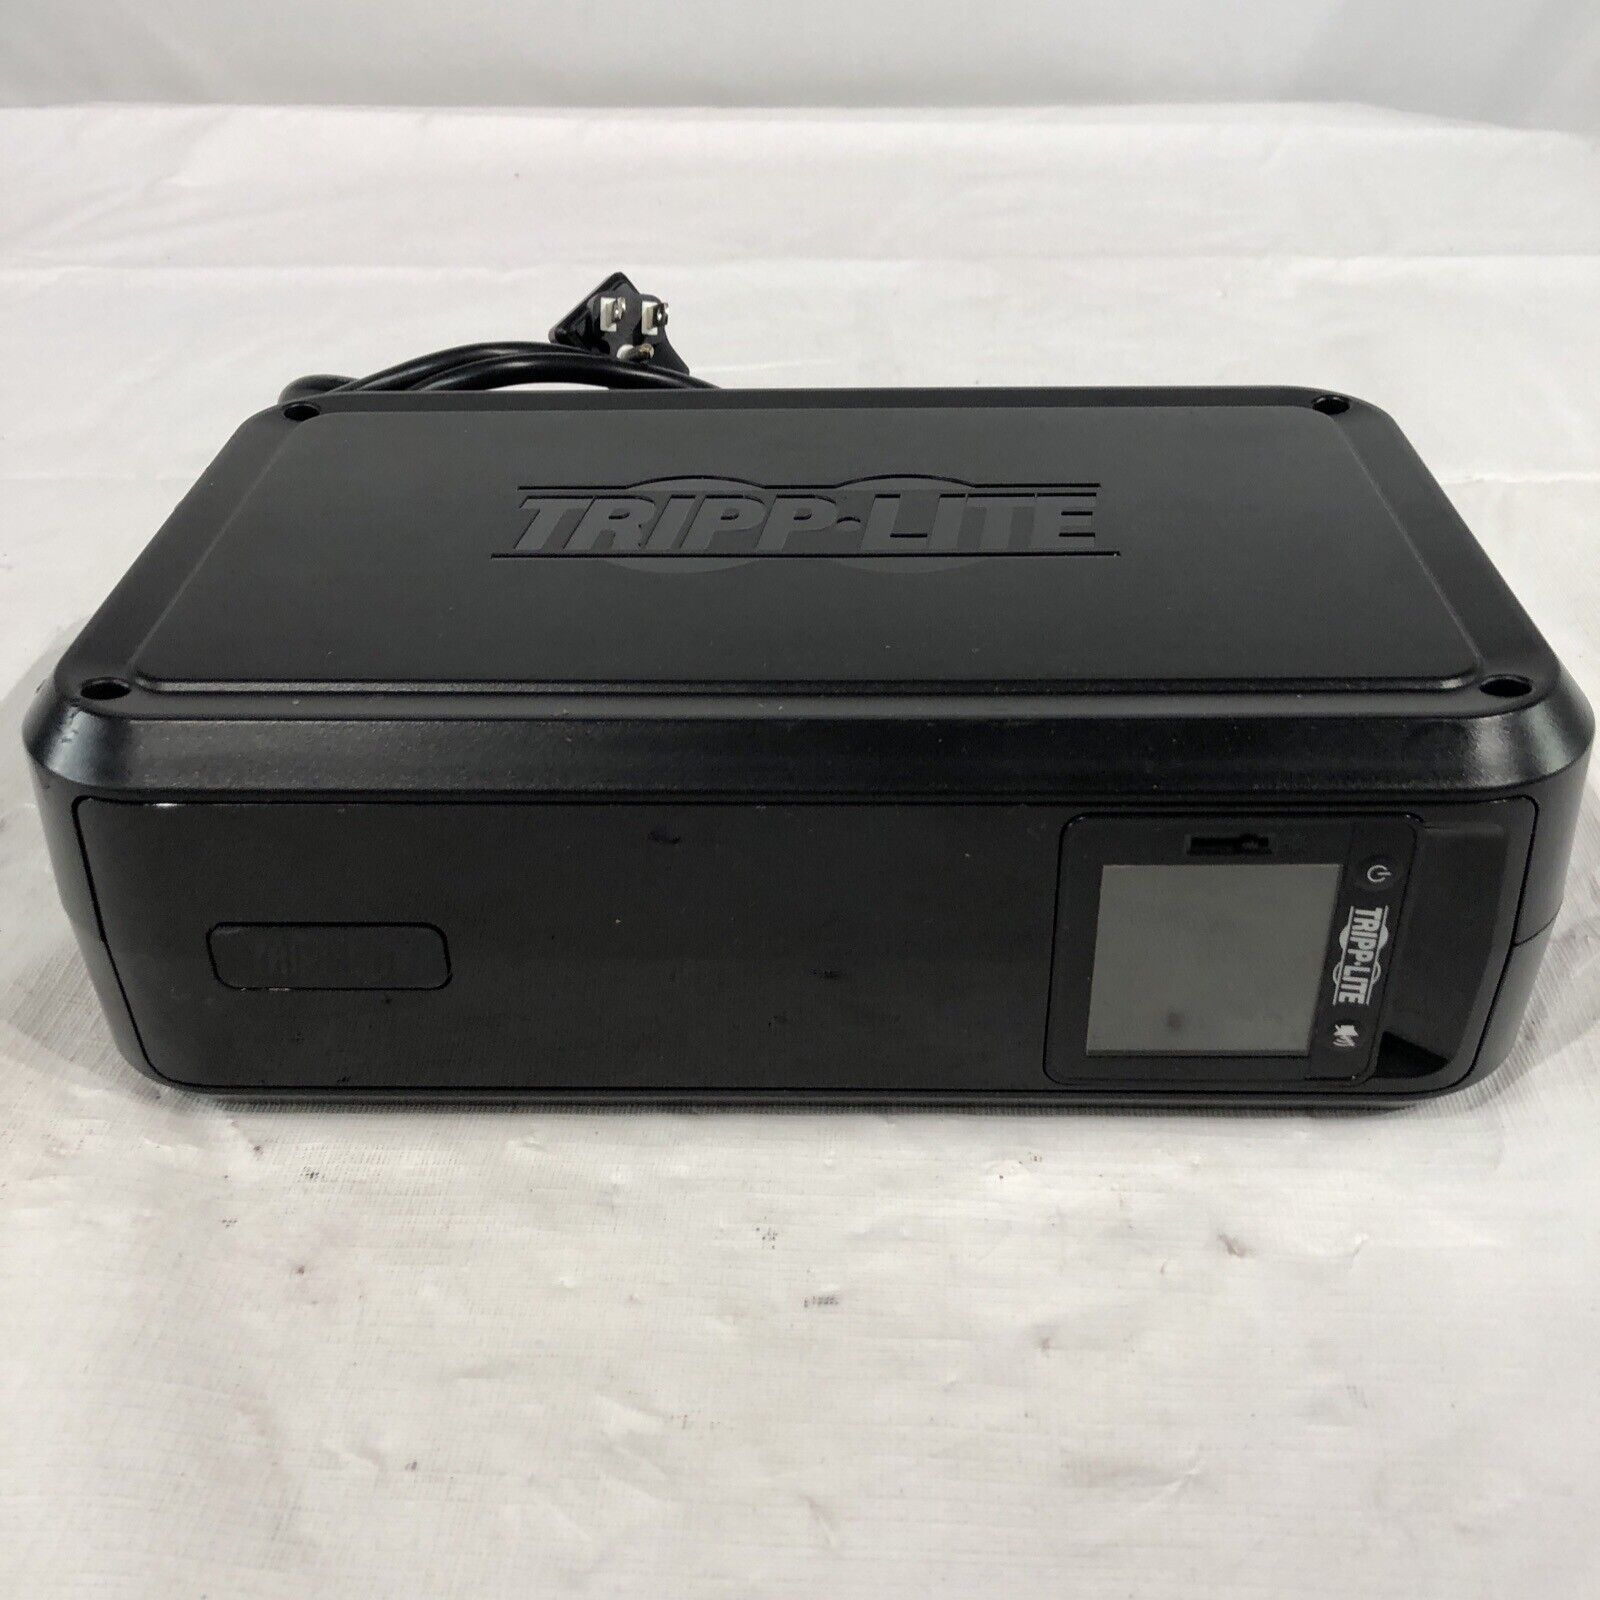 TRIPP-LITE OMNI900LCD (NO BATTERY) (Case Only)